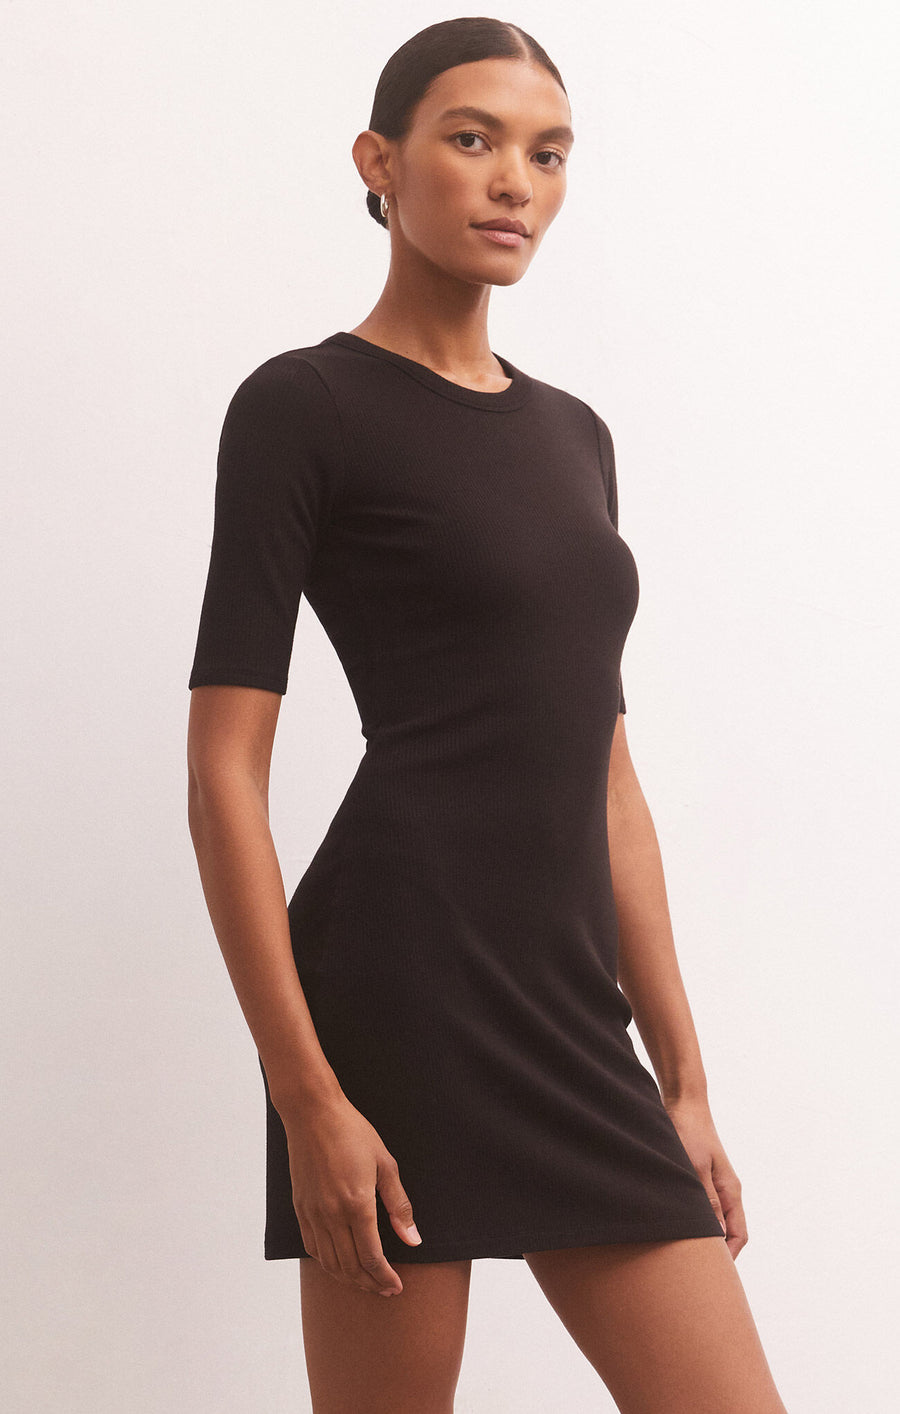 Black shot dress with elbow sleeves.